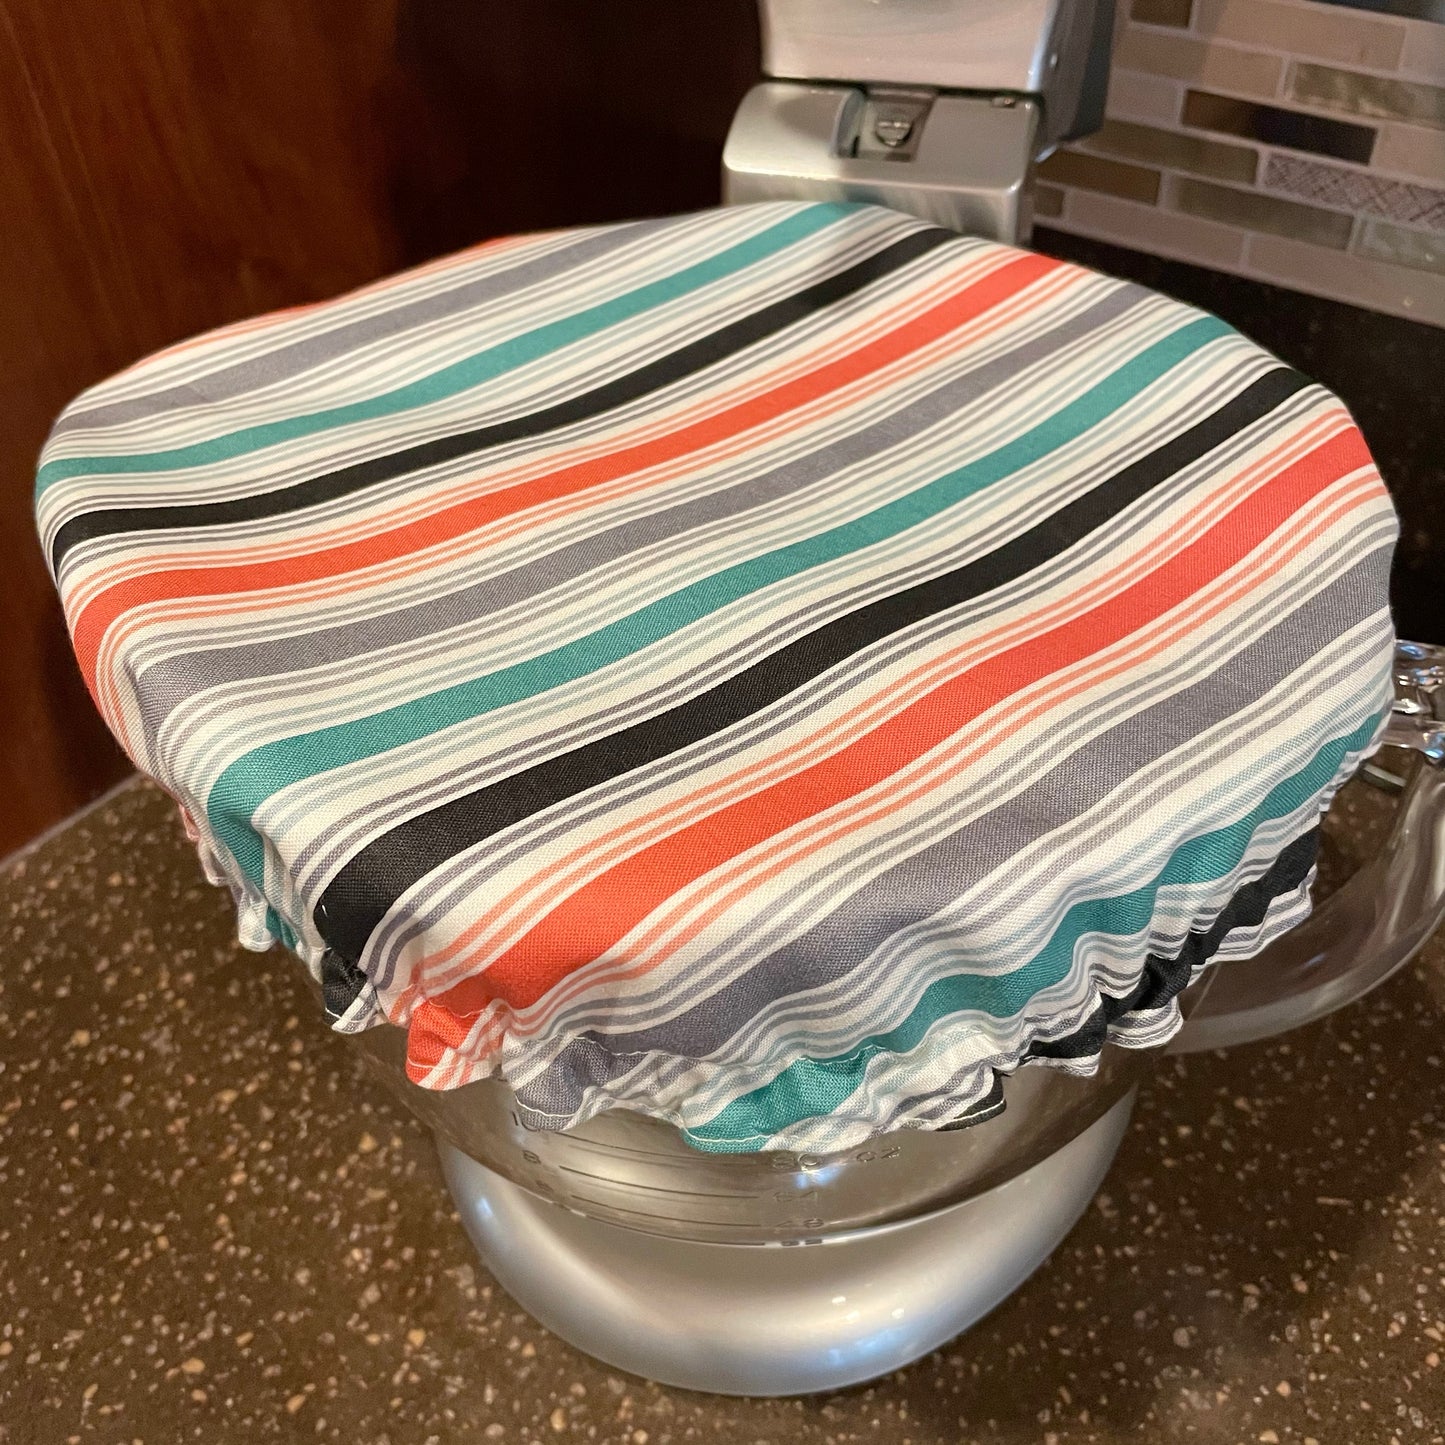 Stand Mixer Bowl Covers - Nautical Stripes